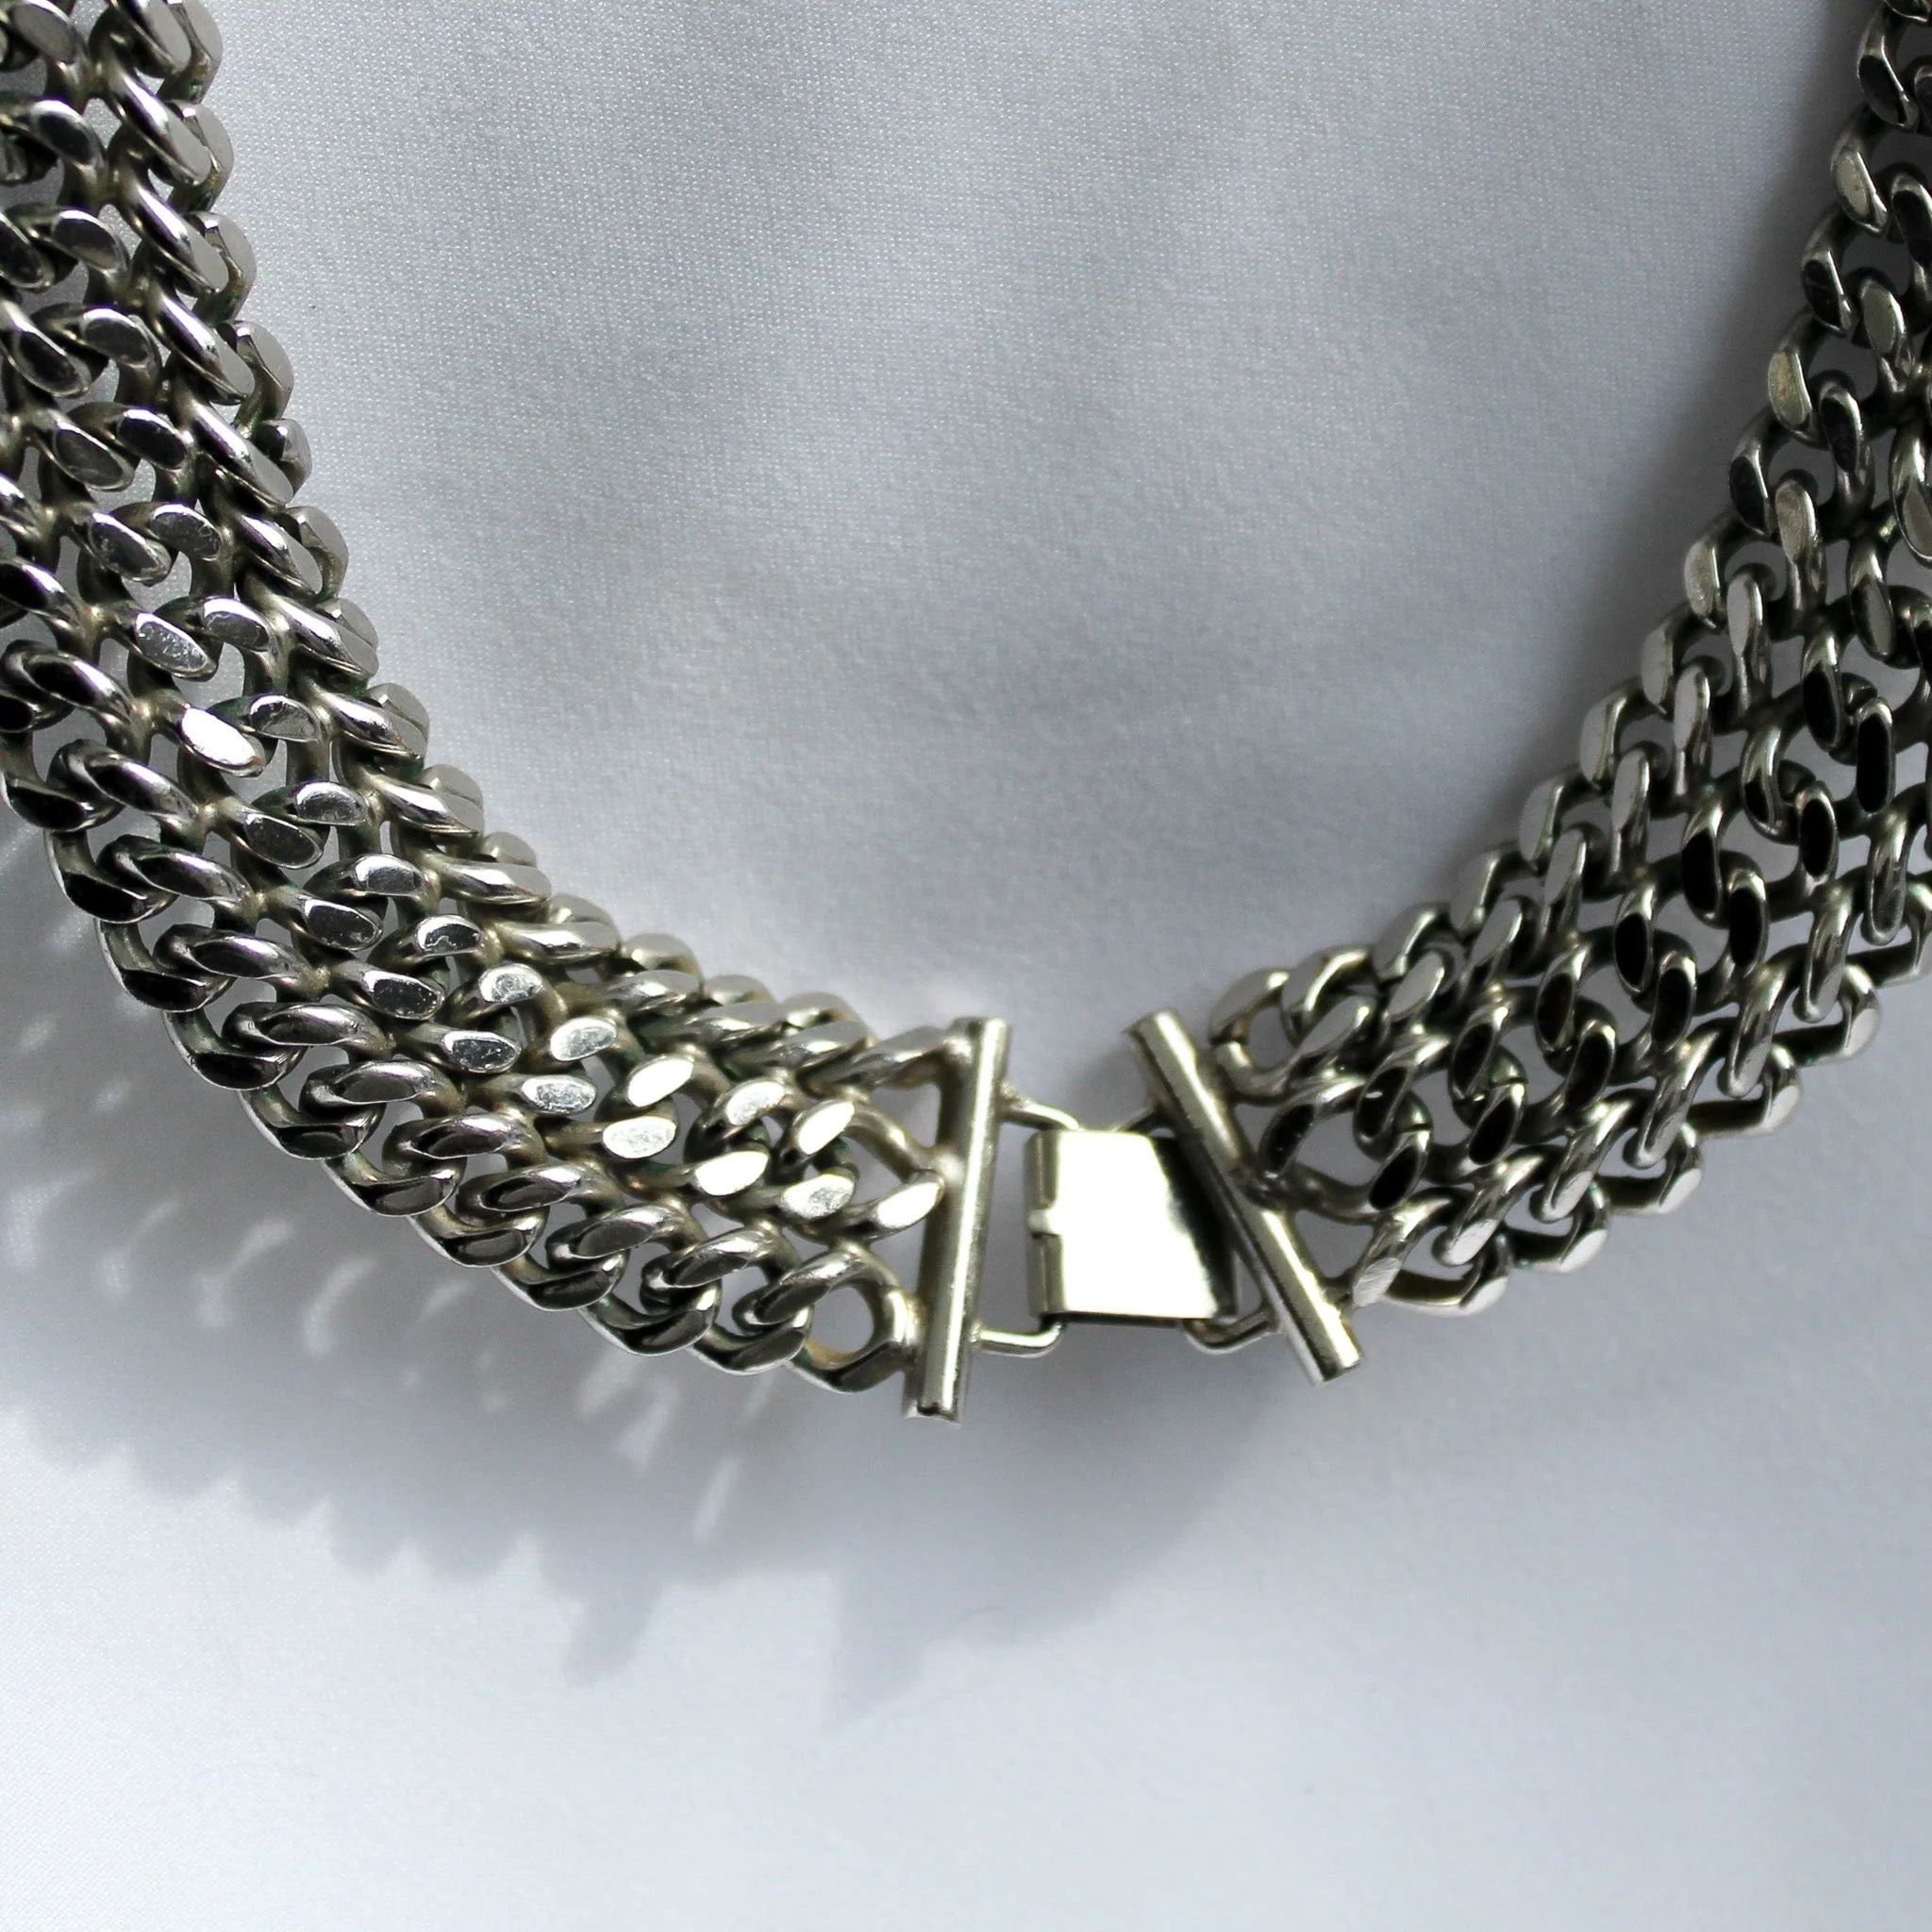 Vintage Monet Necklace in Silver plated Collar, 1980s

Introducing an incredible Vintage Monet 1980s Necklace, a fantastic silver-plated collar that exudes timelessness and quality. Monet, a renowned brand in the world of costume jewelry, has been